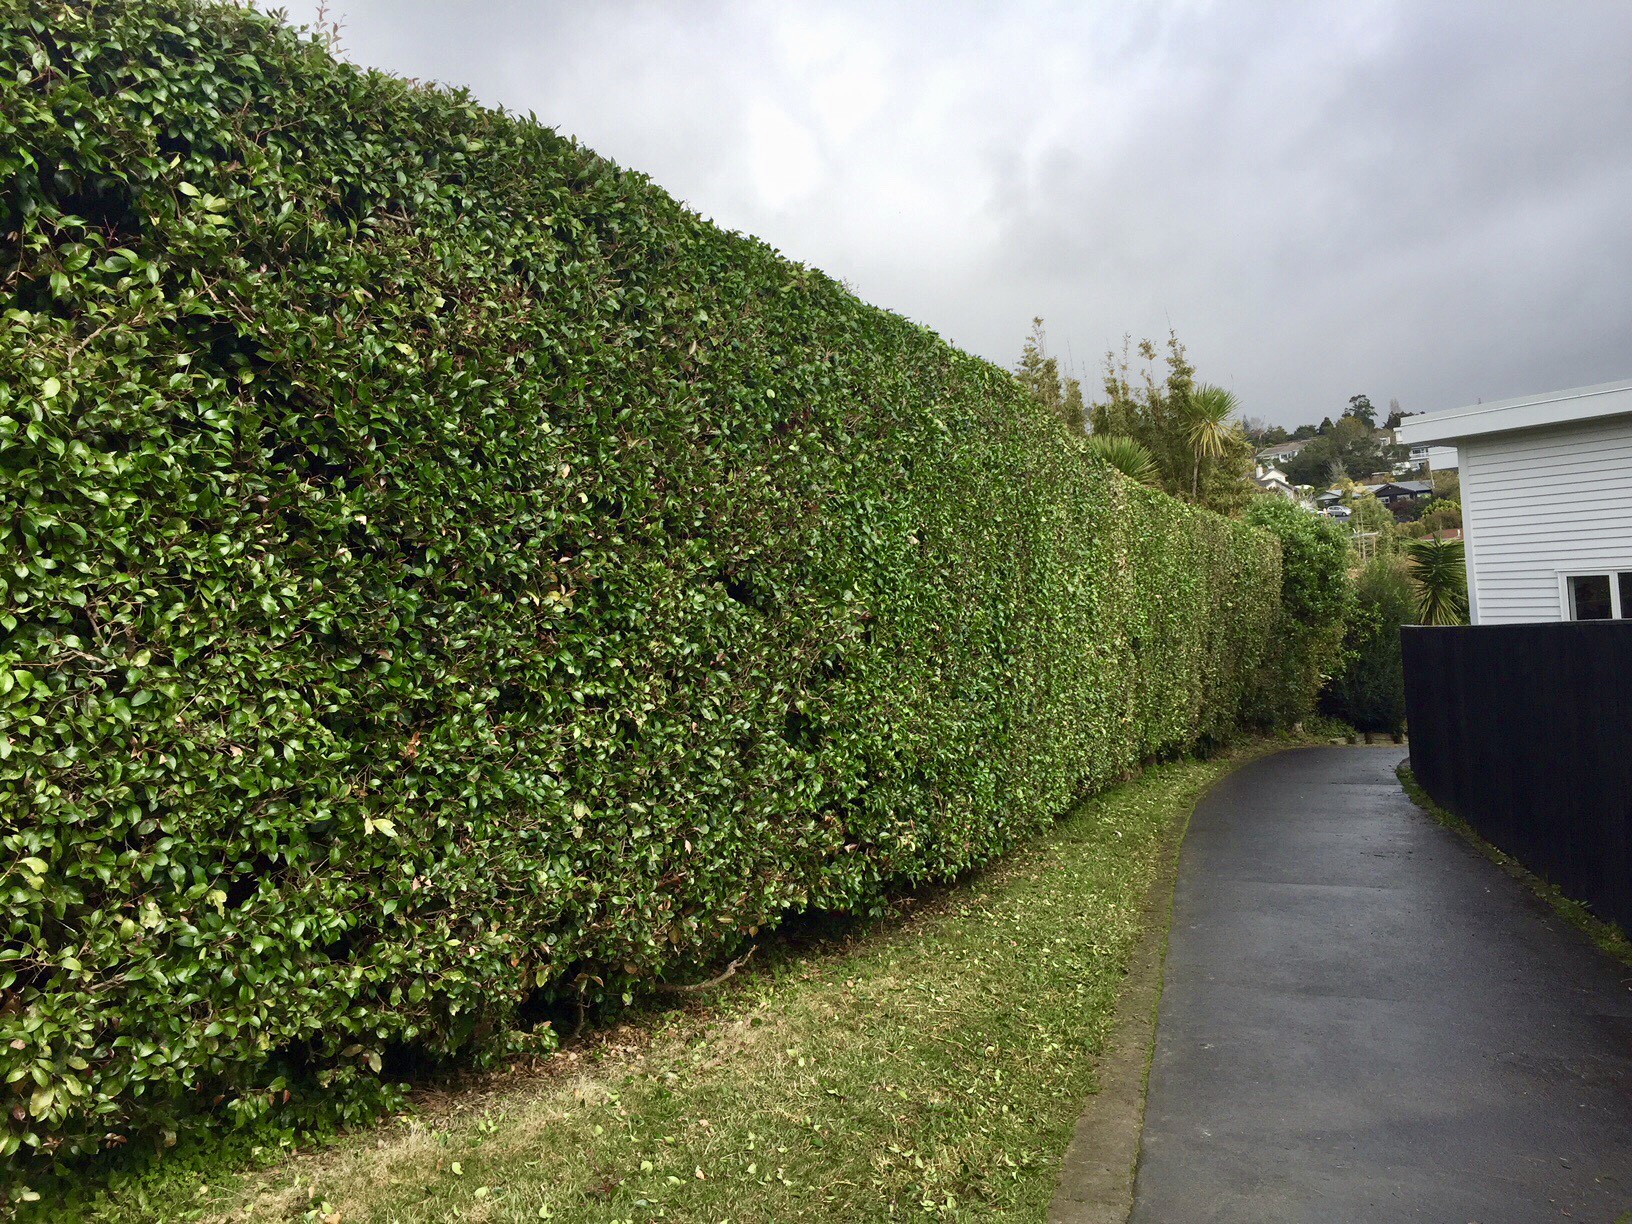 Lilly Pilly Hedge.jpg